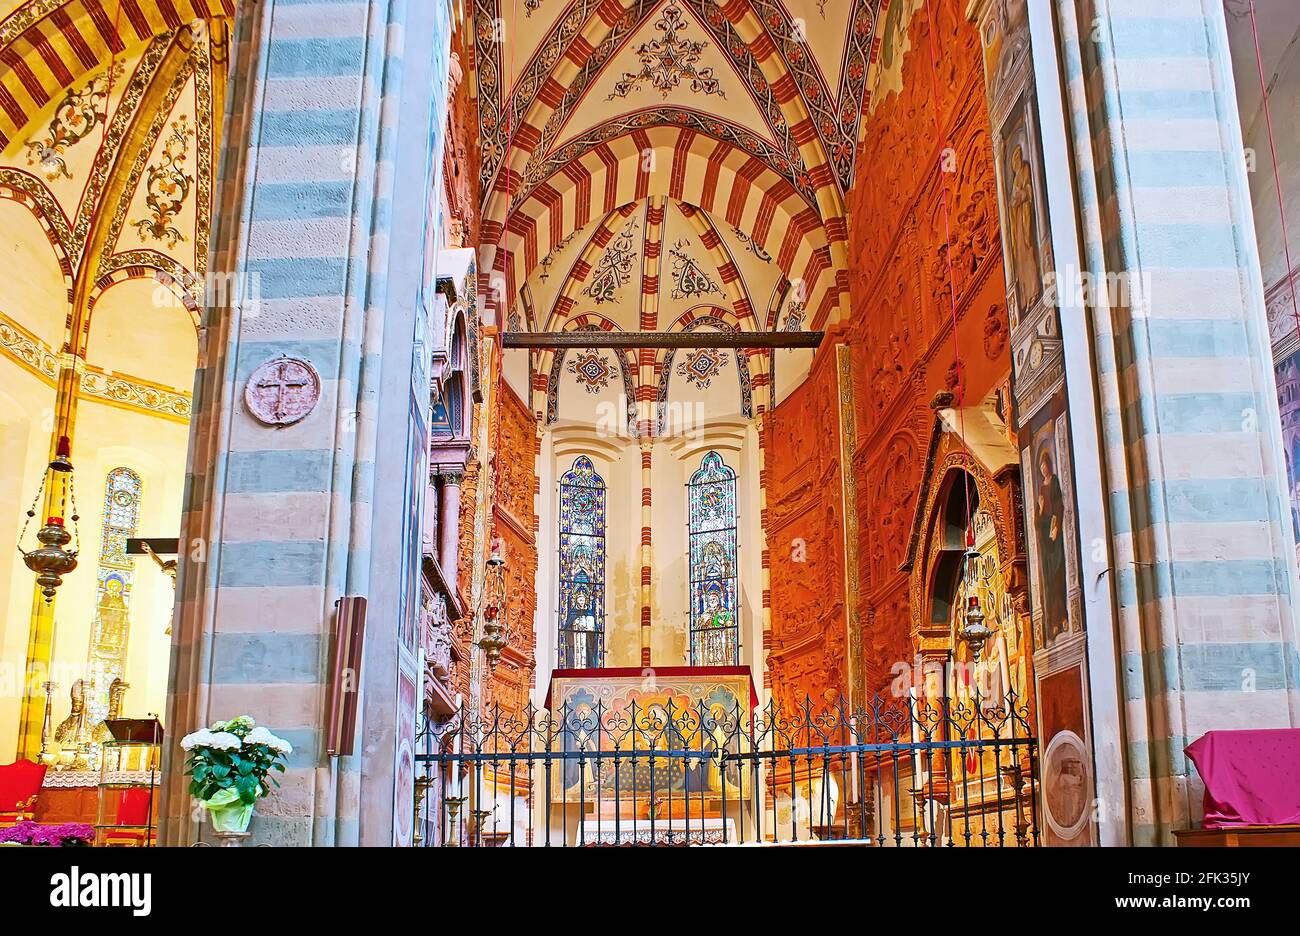 VERONA, ITALY - APRIL 23, 2012: The medieval Pellegrini Chapel in Basilica of Santa Anastasia and richly decorated with molding, carvings, frescoes, s Stock Photo